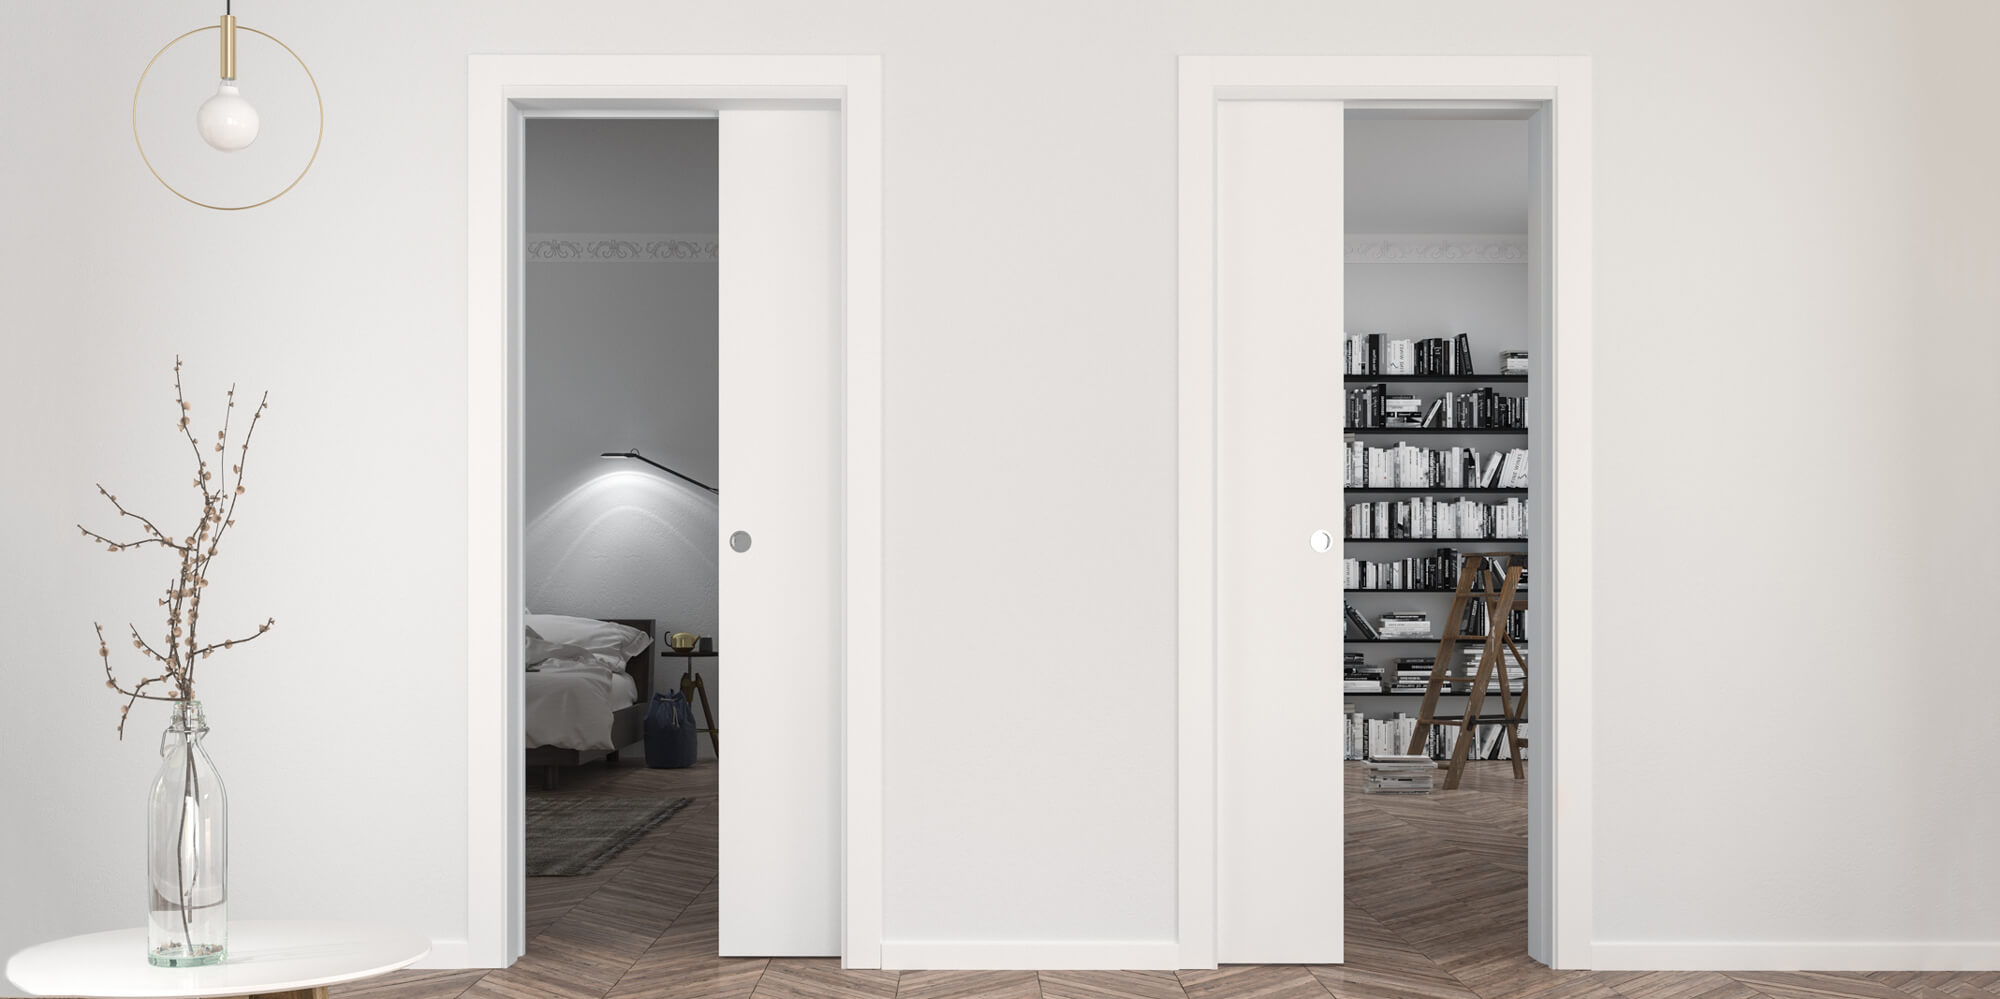 Why Cavity Sliding Doors? 5 Major Benefits for Homeowners